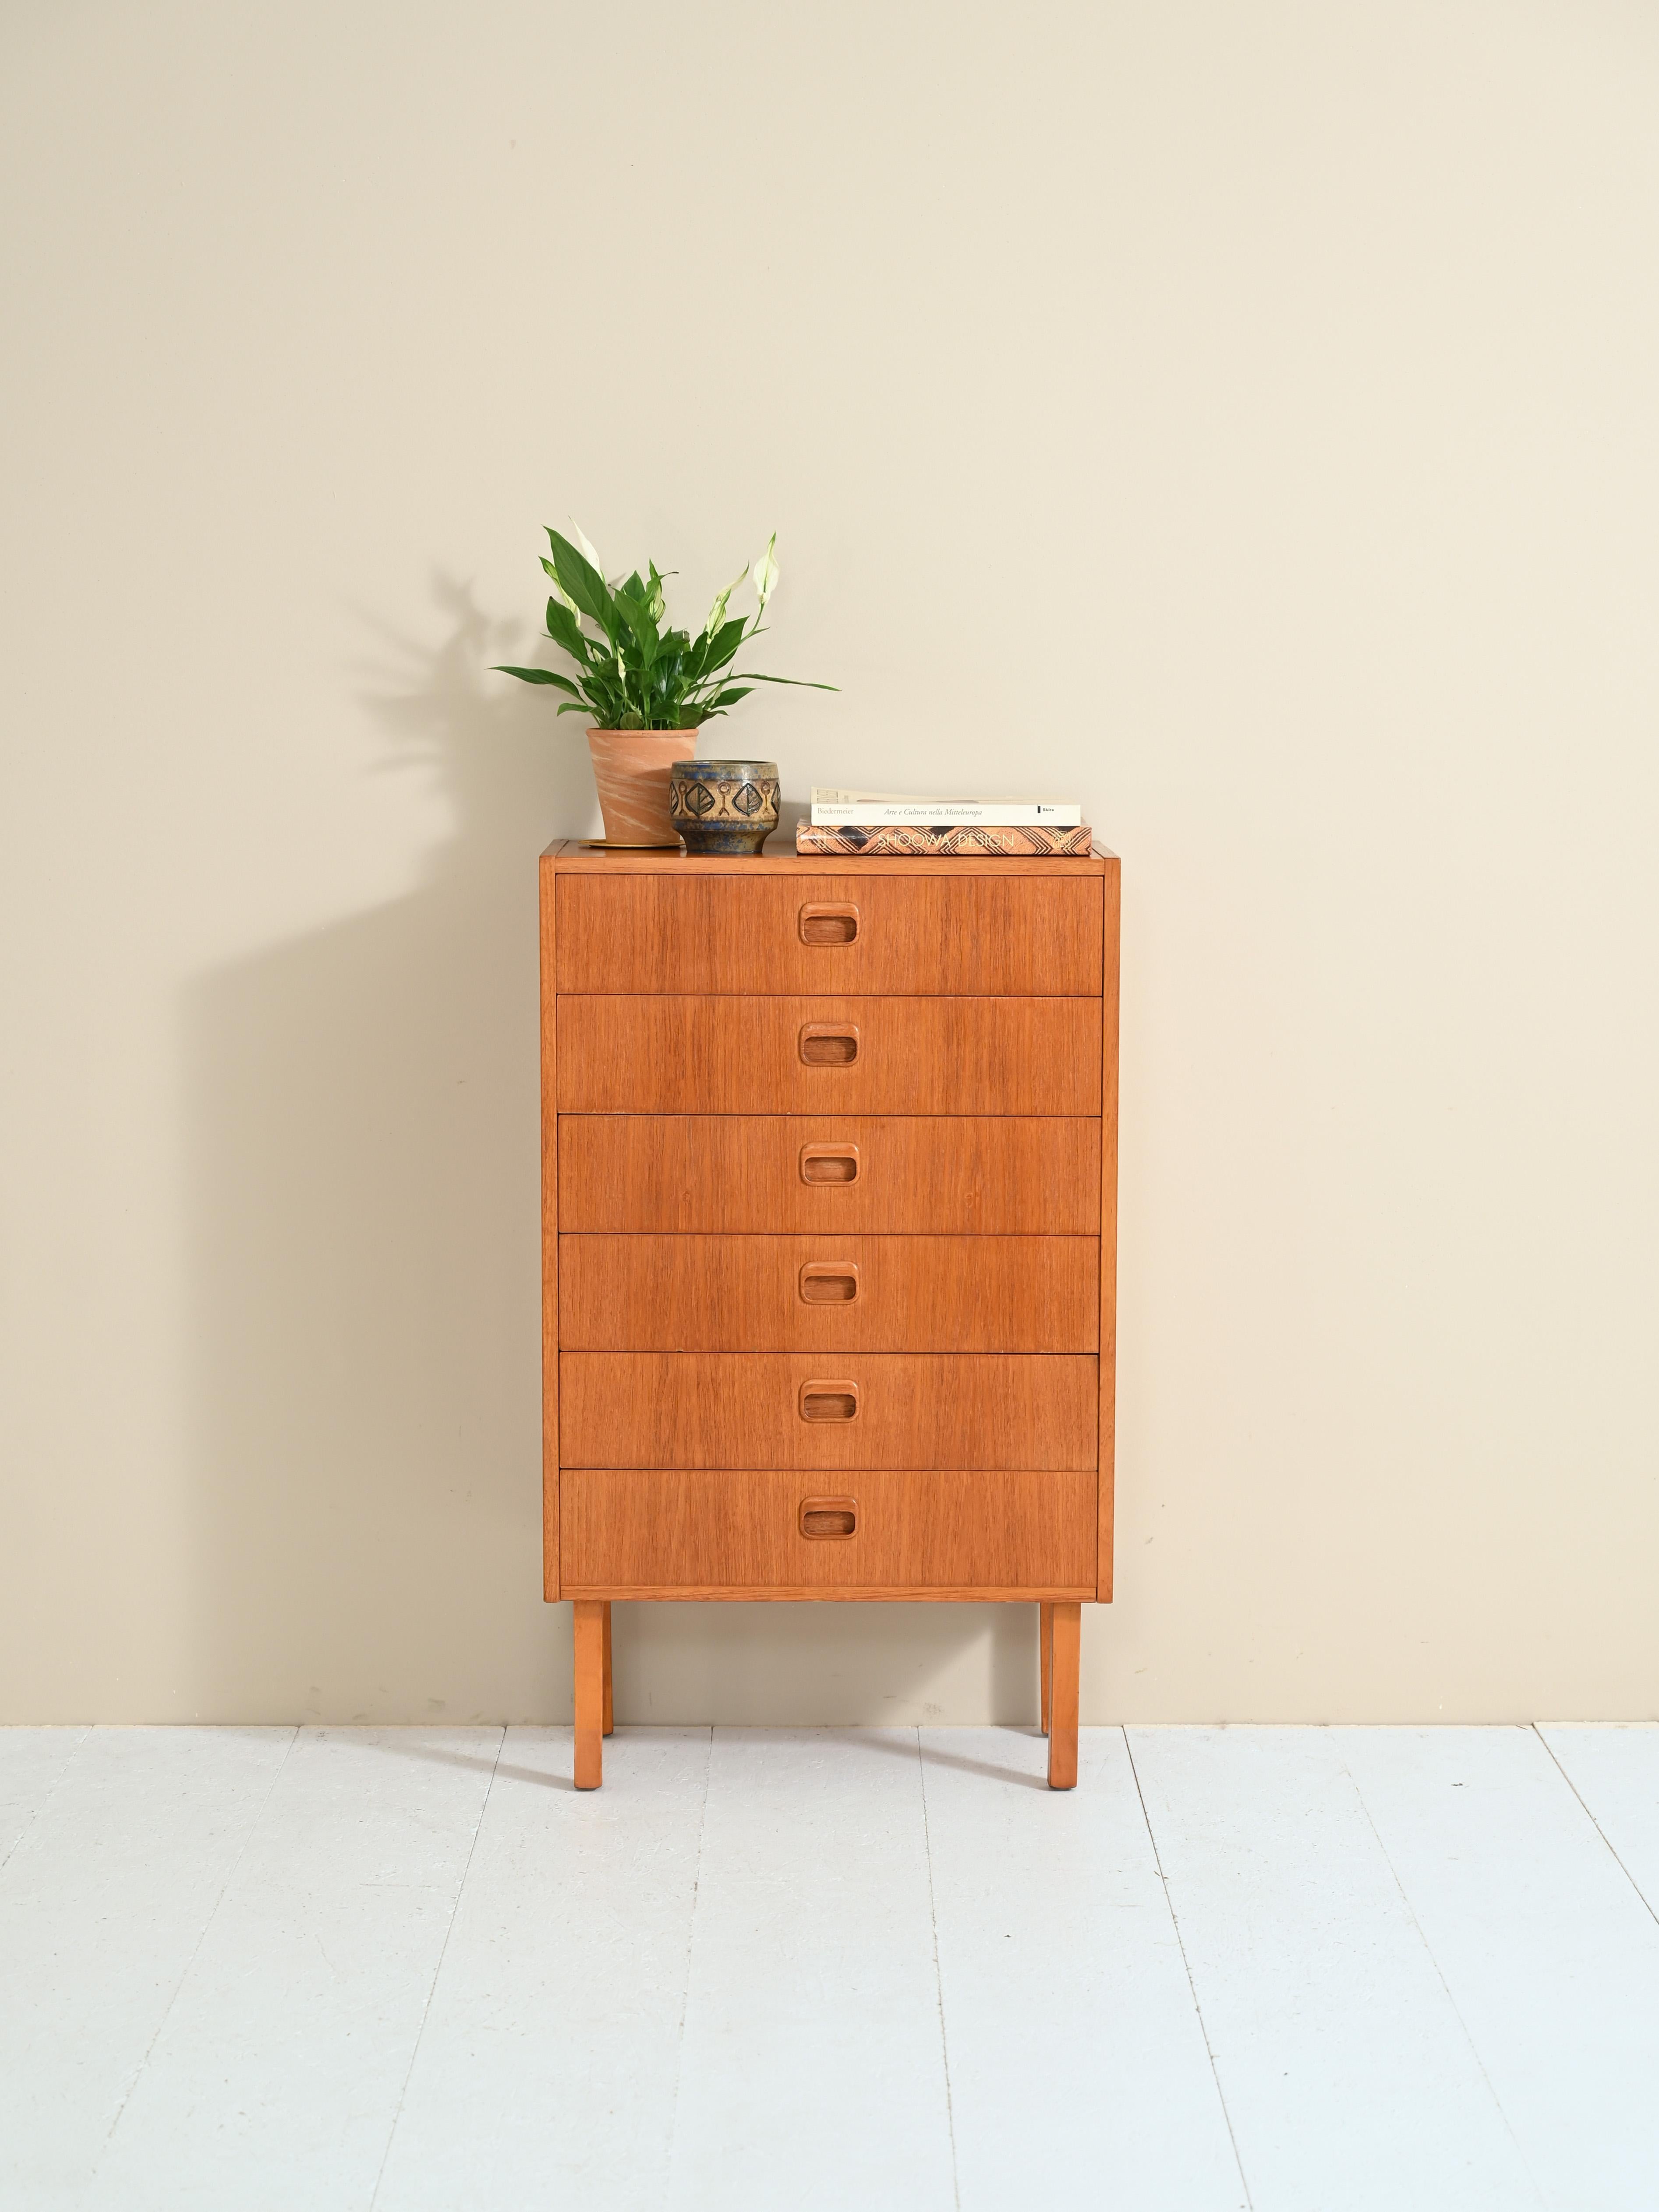 Vintage Scandinavian cabinet from the 1960s with six drawers.

Simple, linear forms for this chest of drawers in warm teak wood tones.

Good condition- May show signs of age- Have been treated with shellac and pure beeswax and carnauba wax.